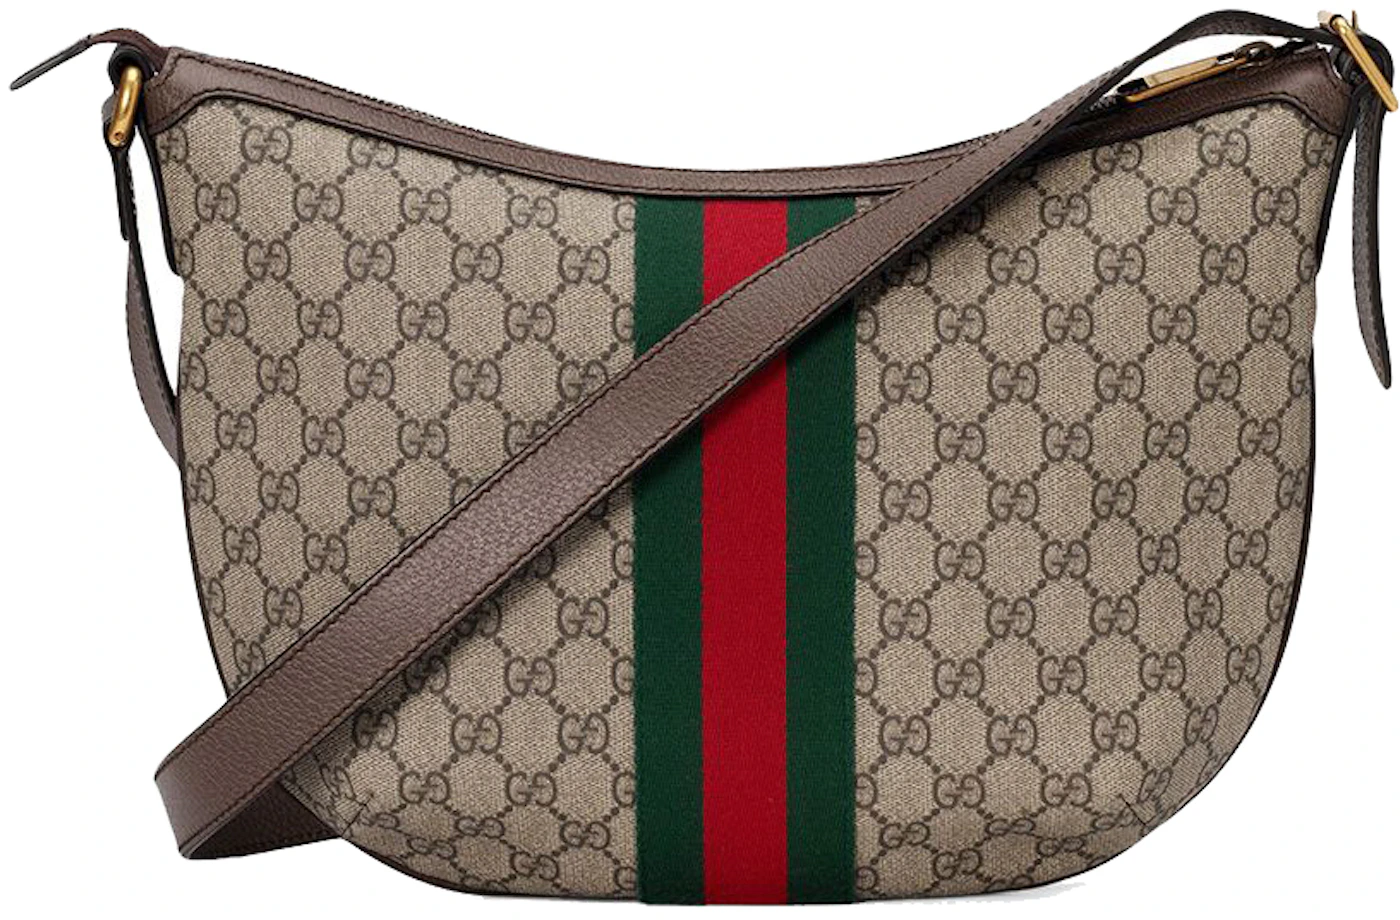 Gucci Ophidia GG Shoulder Bag Small Beige/Ebony in Canvas/Leather with ...